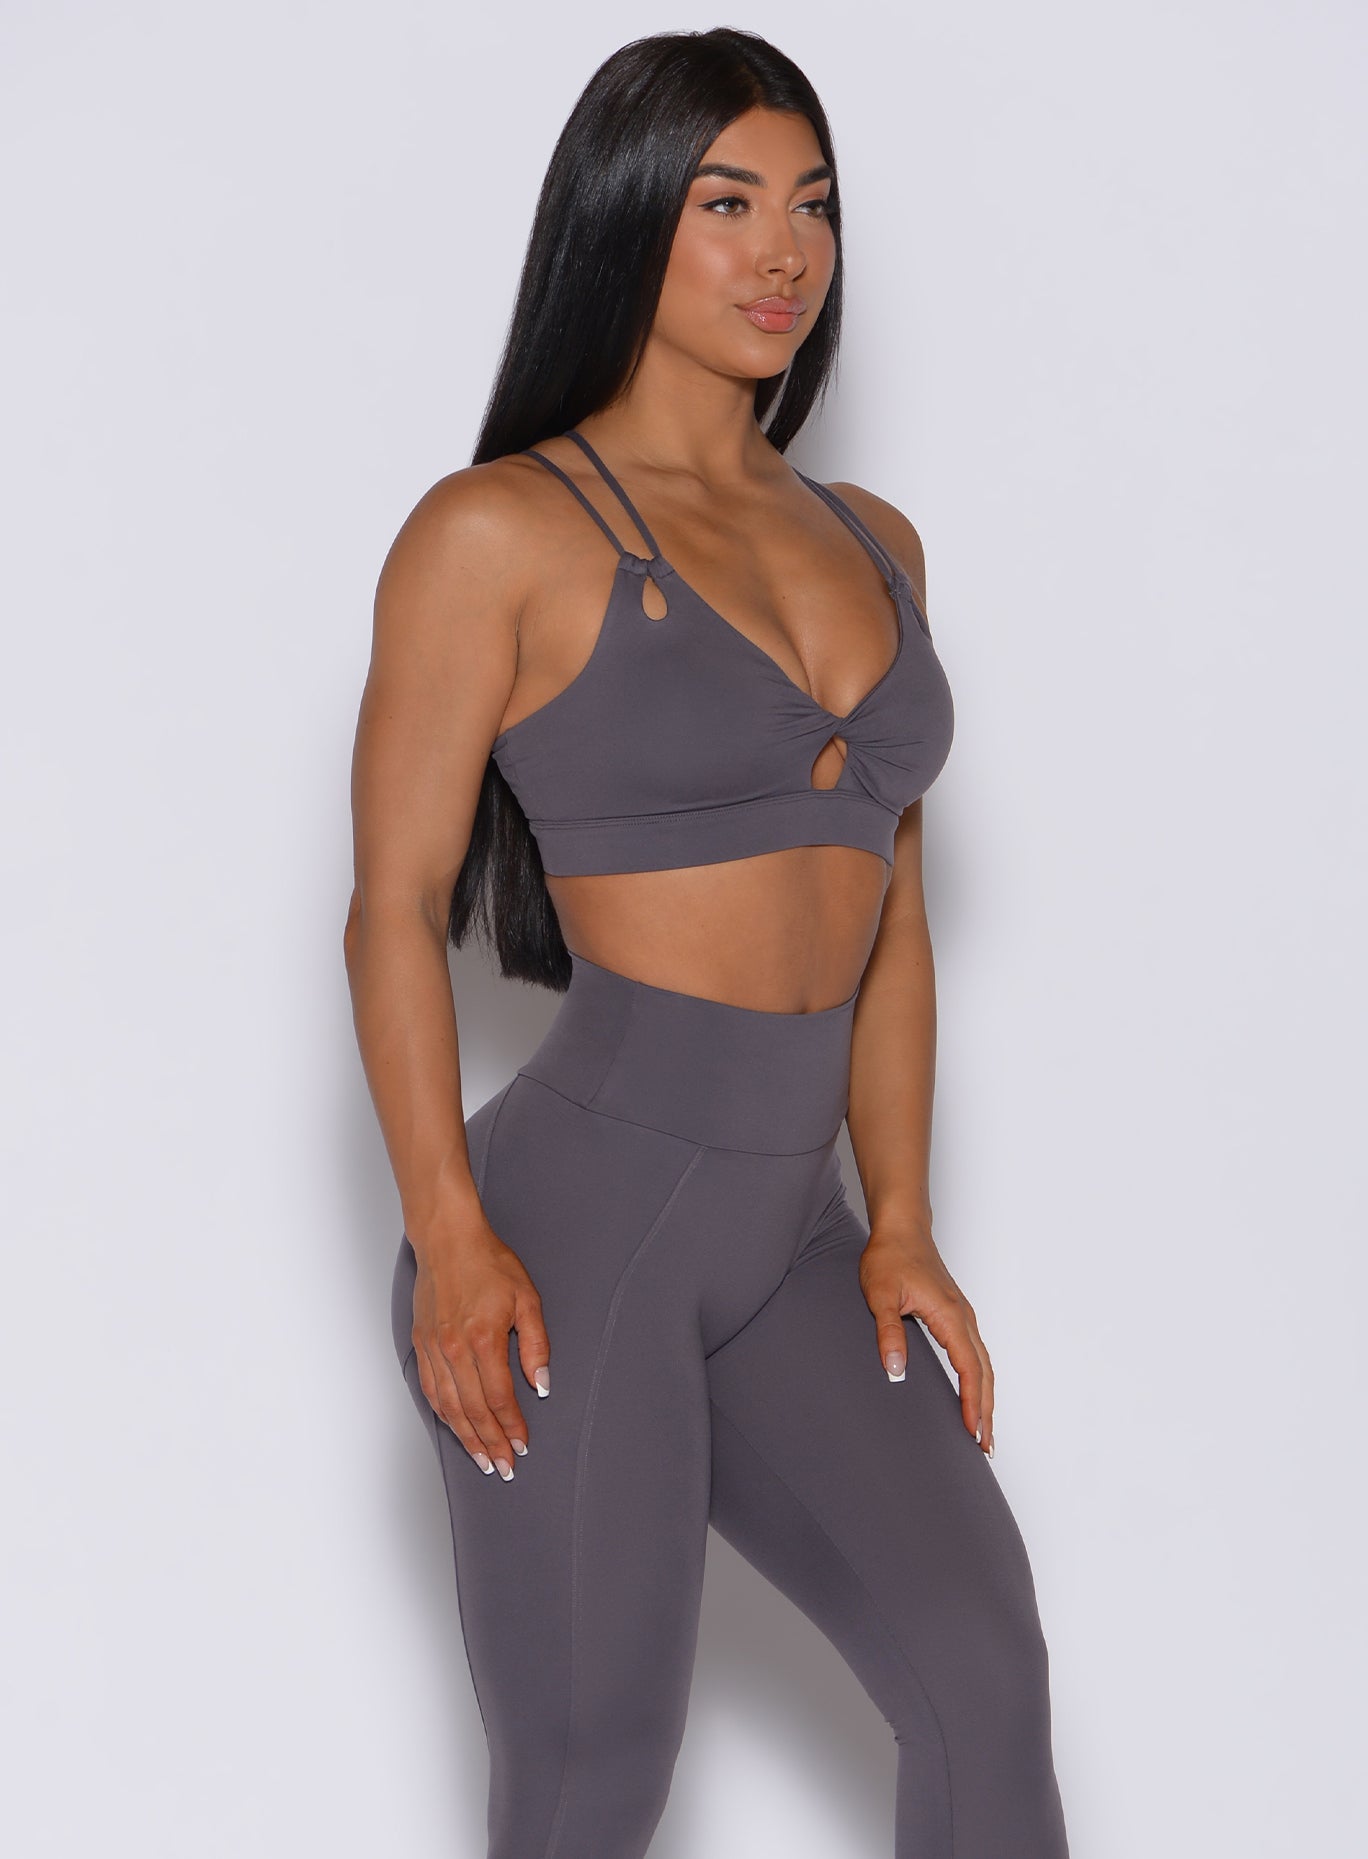 Left side profile view of a model in our twist sports bra in gray smoke color and a matching leggings